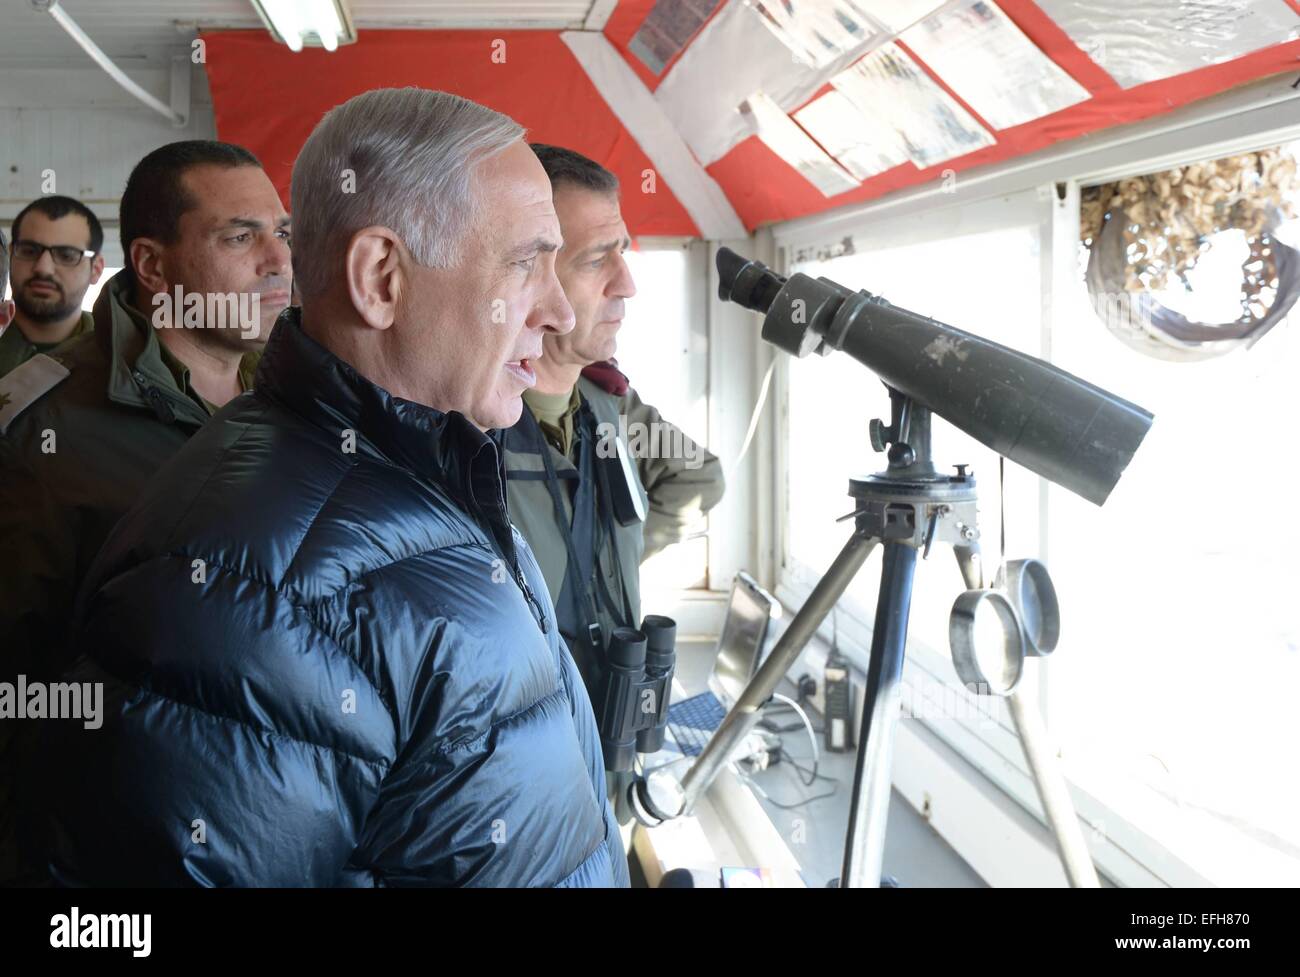 Jerusalem. 4th Feb, 2015. Israeli Prime Minister Benjamin Netanyahu (front) visits an Israel Defense Forces (IDF) base near Mount Hermon, on Feb. 4, 2015. Israeli Prime Minister Benjamin Netanyahu said Wednesday that Iran is trying to open a front against Israel along its border with Syria. Netanyahu visited earlier in the day an Israel Defense Forces (IDF) base near Mount Hermon along with Defense Minister Moshe Ya'alon. Credit:  GPO/Amos Ben Gershom/Xinhua/Alamy Live News Stock Photo